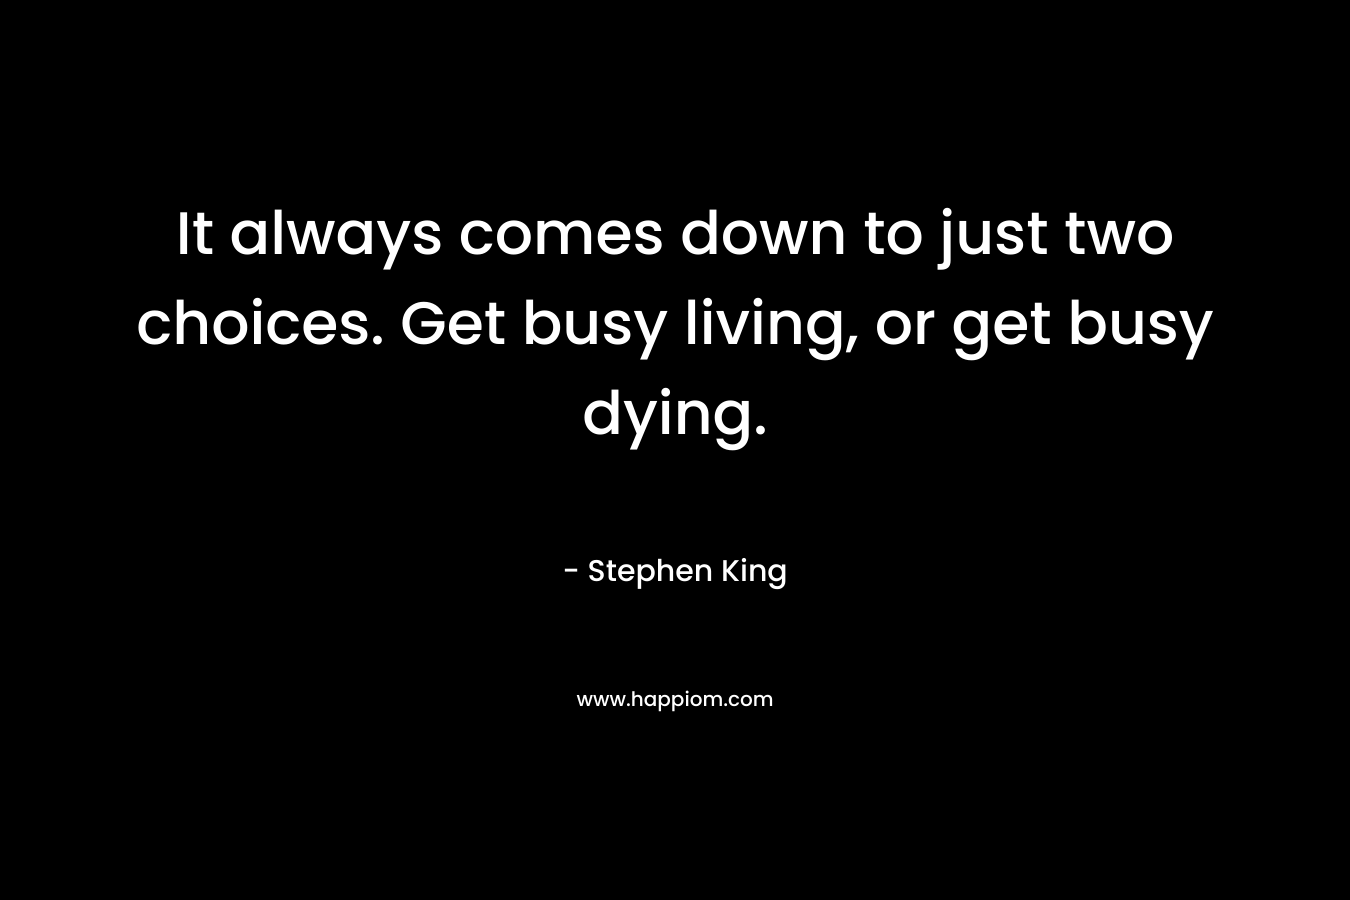 It always comes down to just two choices. Get busy living, or get busy dying.